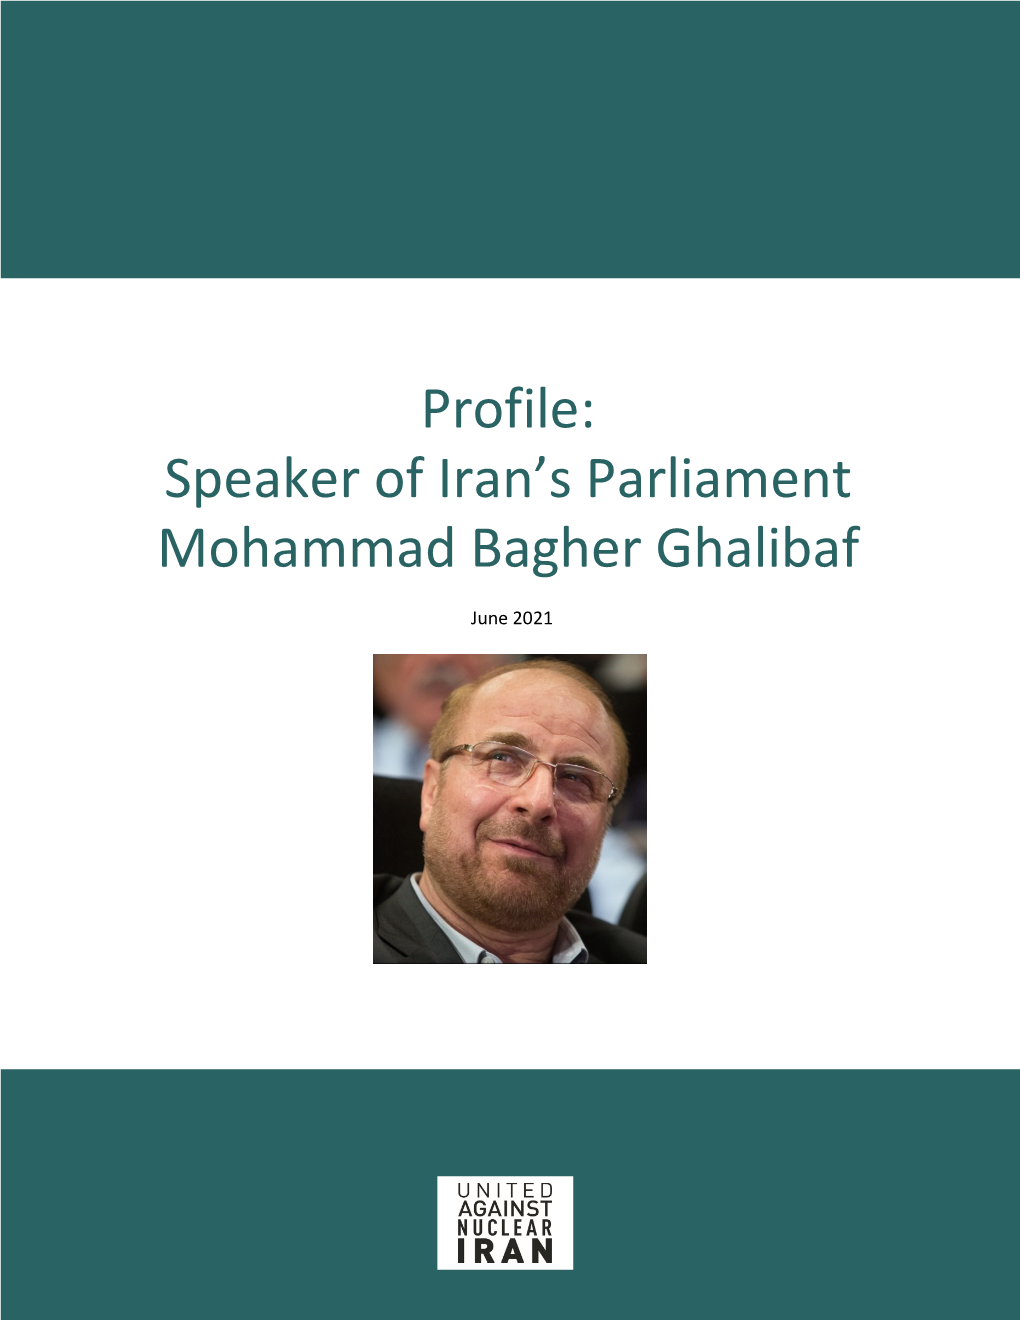 Profile: Speaker of Iran's Parliament Mohammad Bagher Ghalibaf